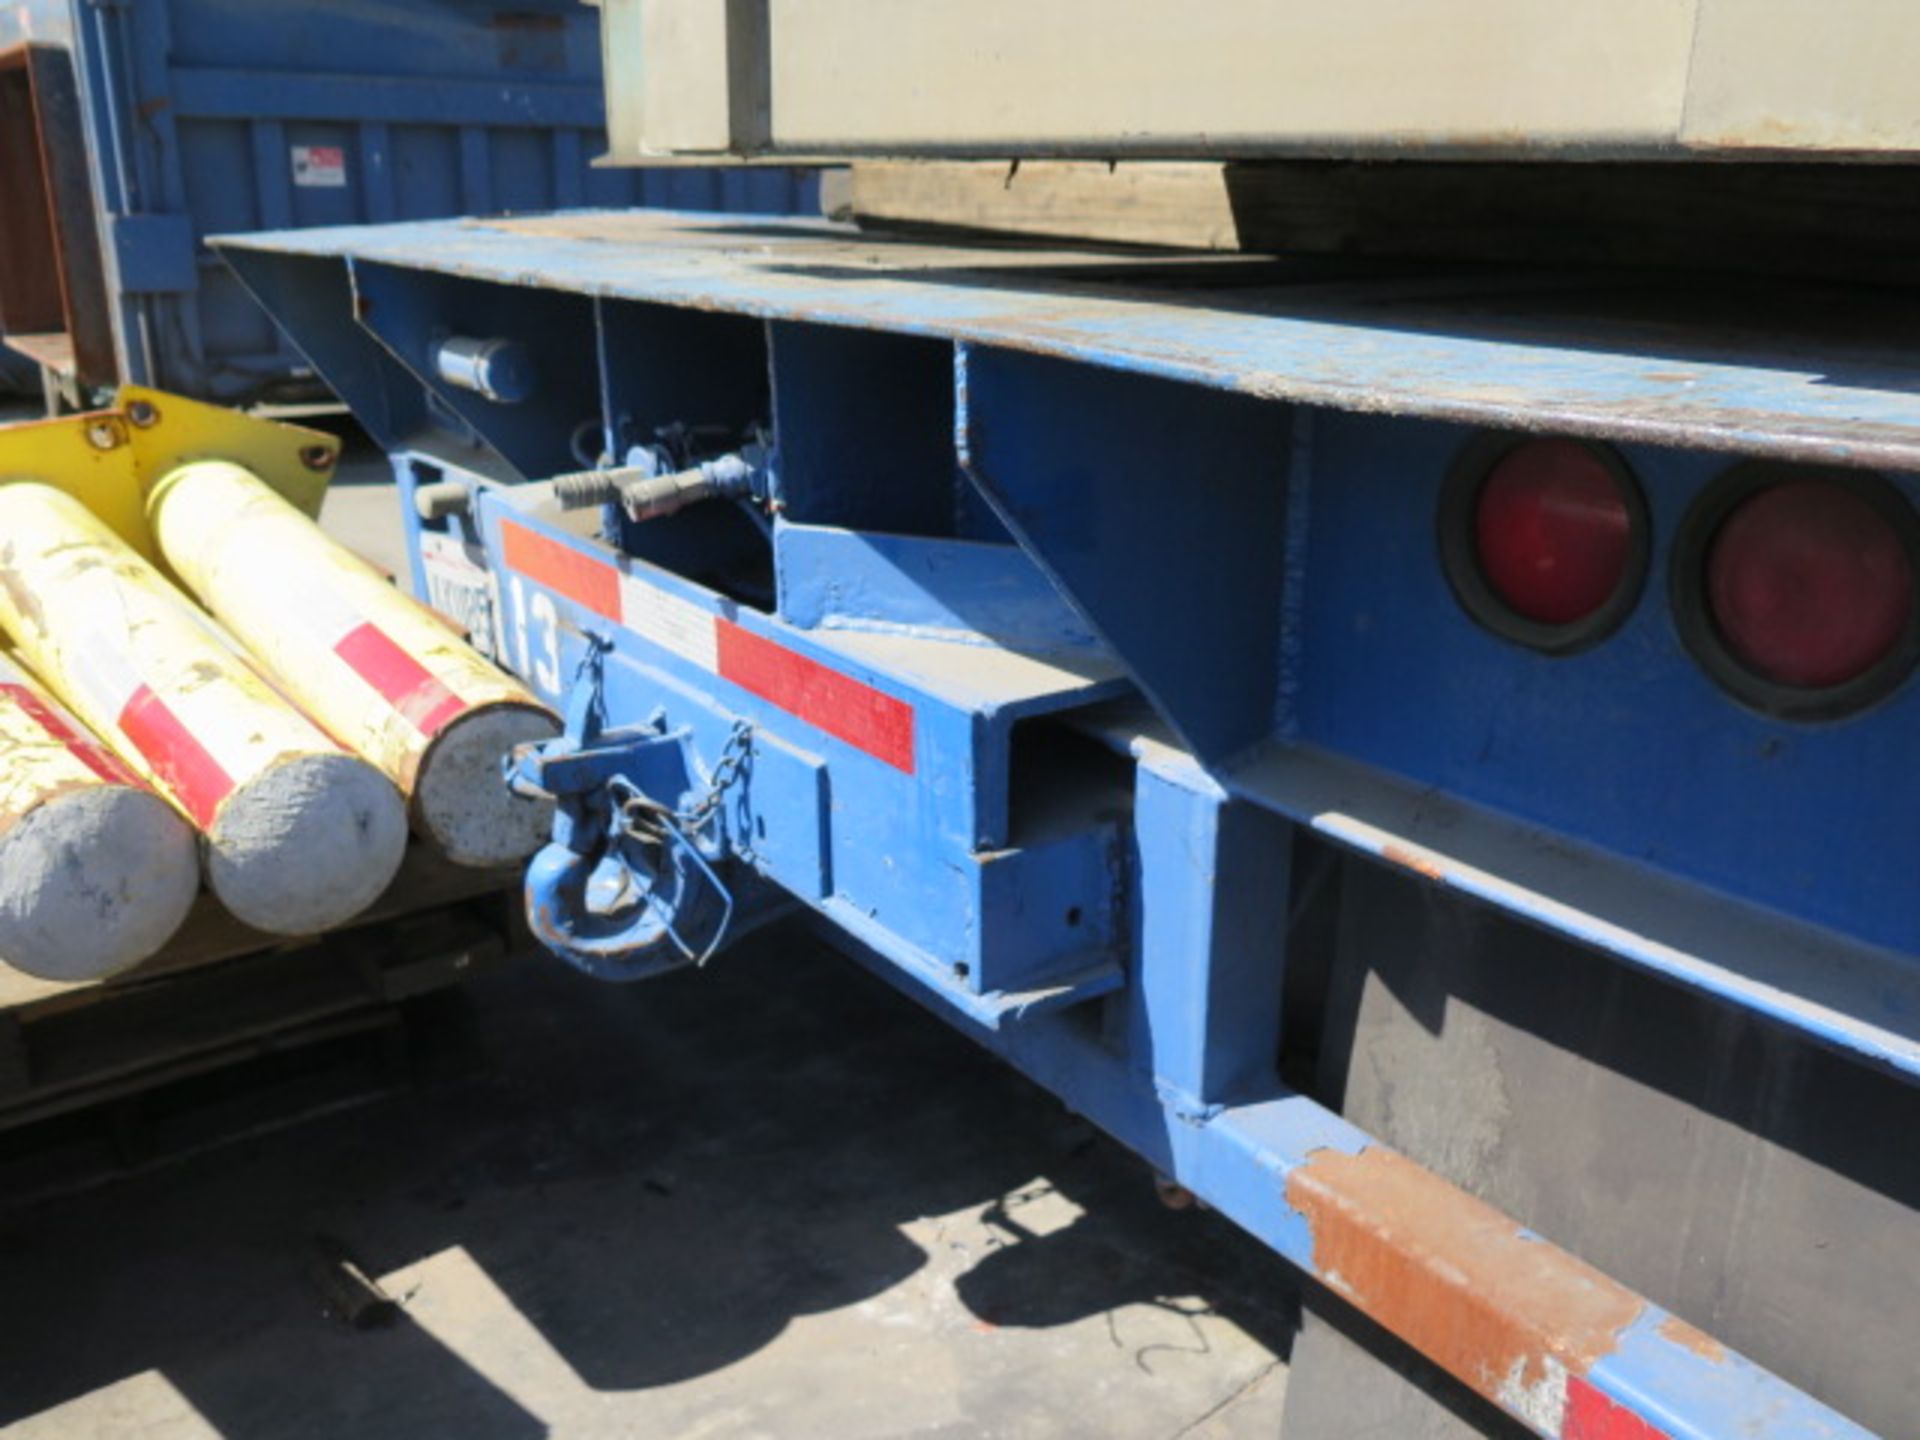 Drop-Deck Trailer Lisc 4KU8502 (SOLD AS-IS - NO WARRANTY) - Image 15 of 16